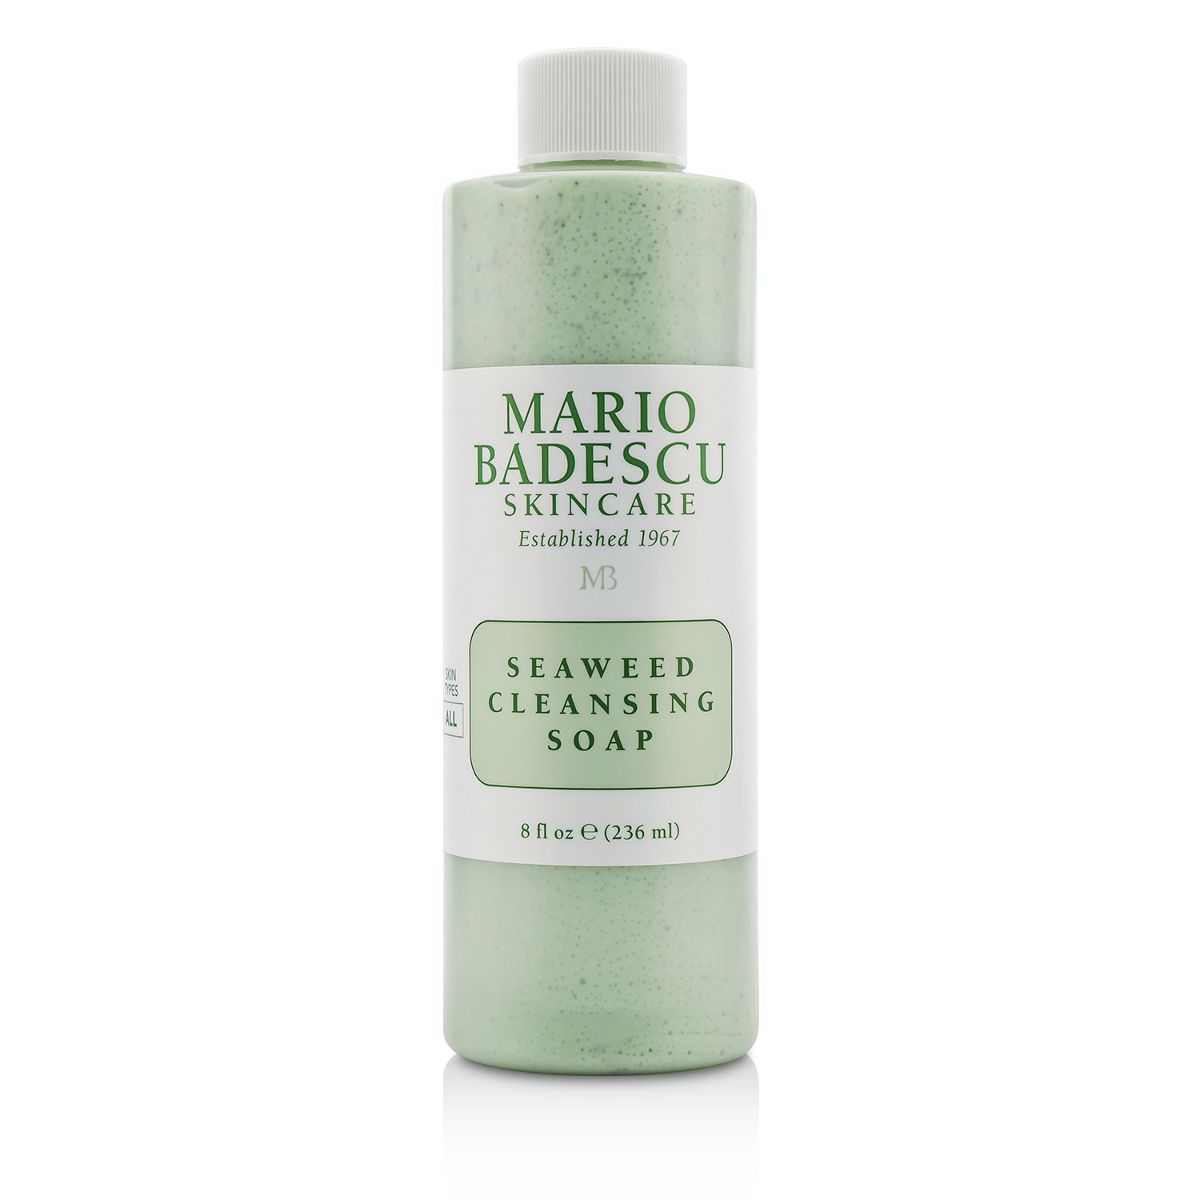 Seaweed Cleansing Soap - For All Skin Types Mario Badescu Image